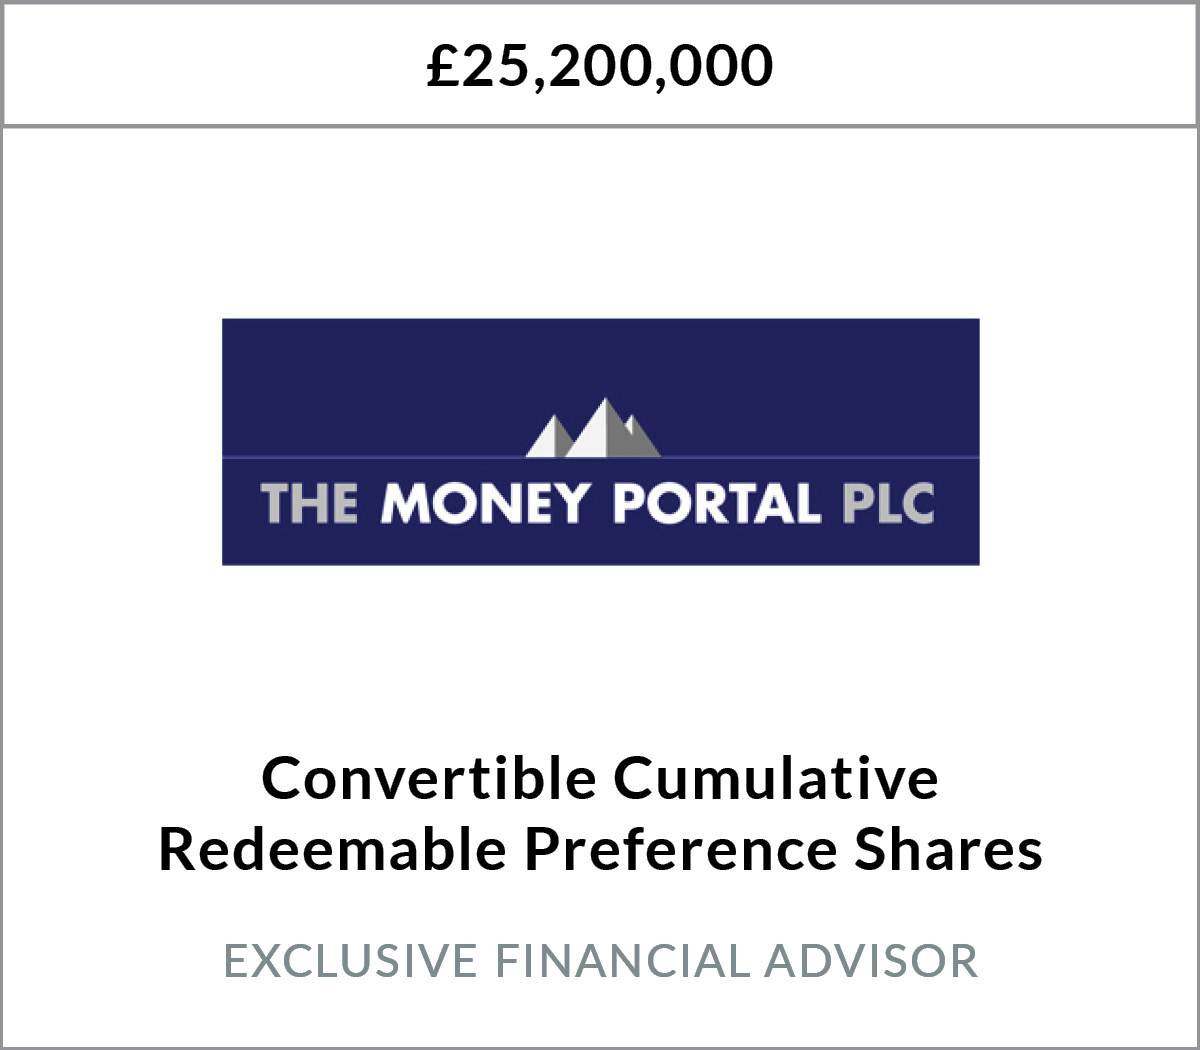 The Money Portal PLC issues Convertible Cumulative Preference Shares